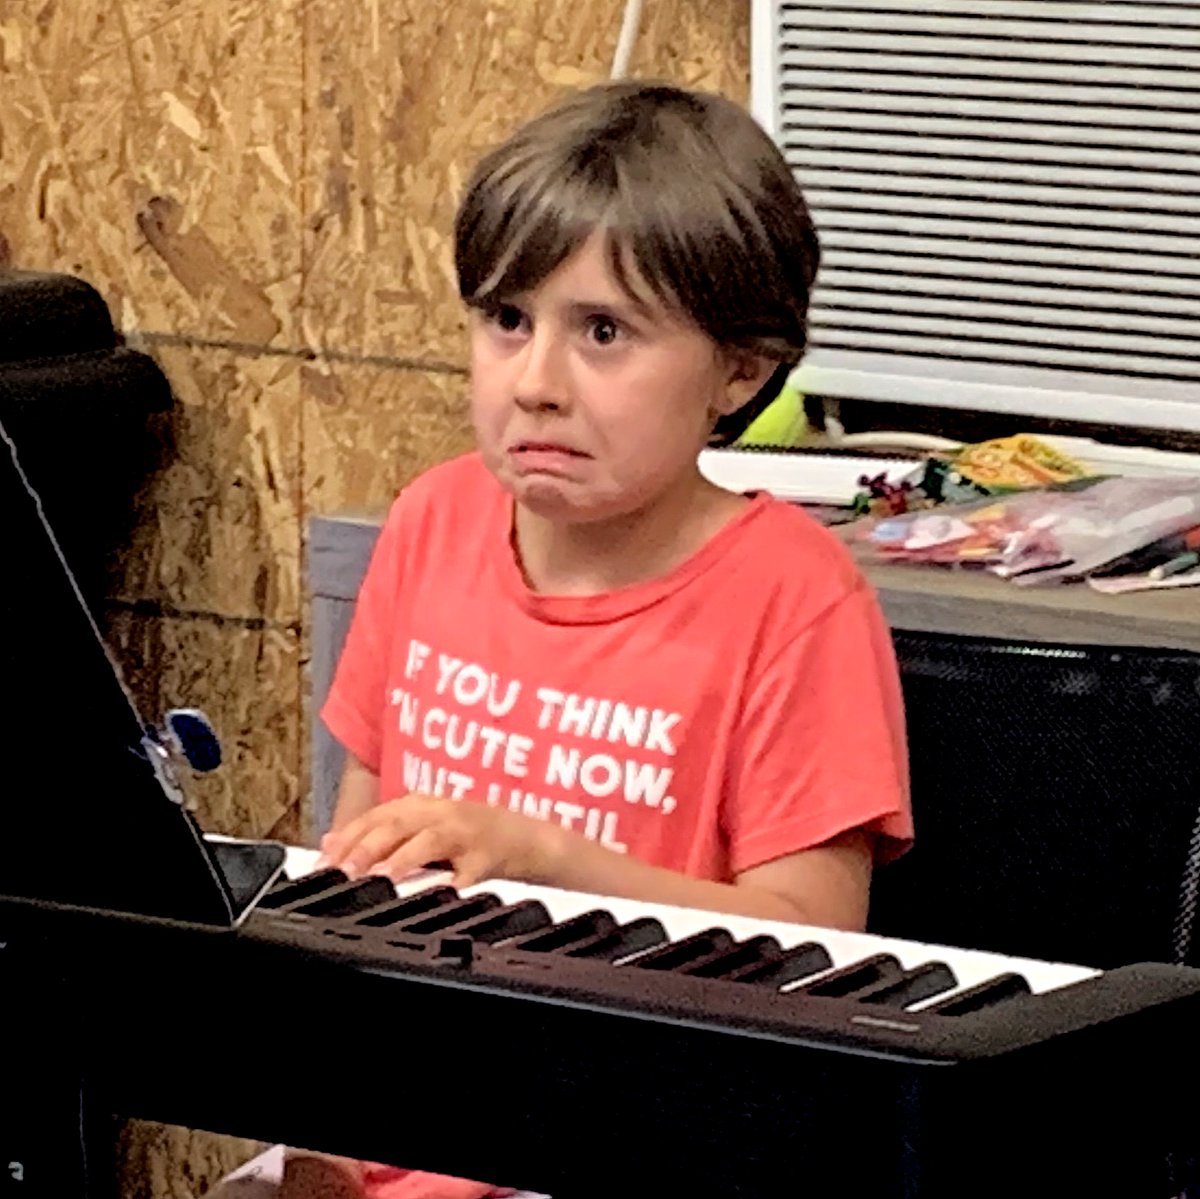 That moment when you realize you forgot to sign up for music lessons 😨 Call today to reserve your spot in private or group lessons! We offer piano, guitar, drums & voice. Don't miss your chance! #GreensboroPerformingArts #MusicLessons #PianoLessons #voicelessons #guitar #drums